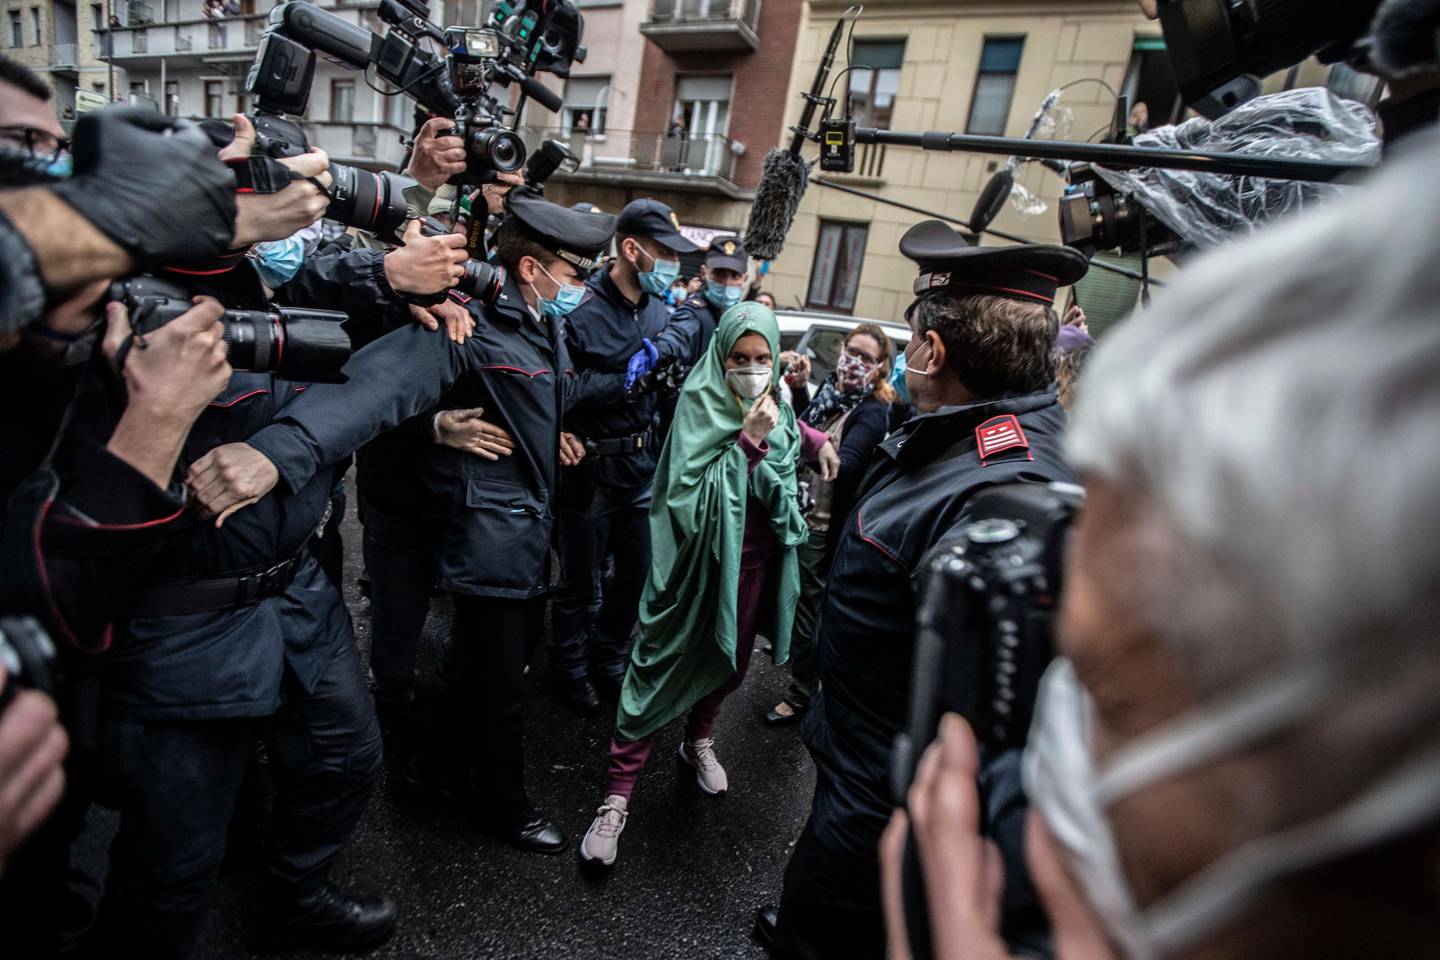 Silvia Romano, escorted by Carabinieri, arrives at her home wearing a surgical mask to guard against COVID-19, in Milan, Italy, Monday, May 11, 2020. The young Italian woman has returned to her homeland after 18 months as a hostage in eastern Africa. (AP Photo/Luca Bruno)